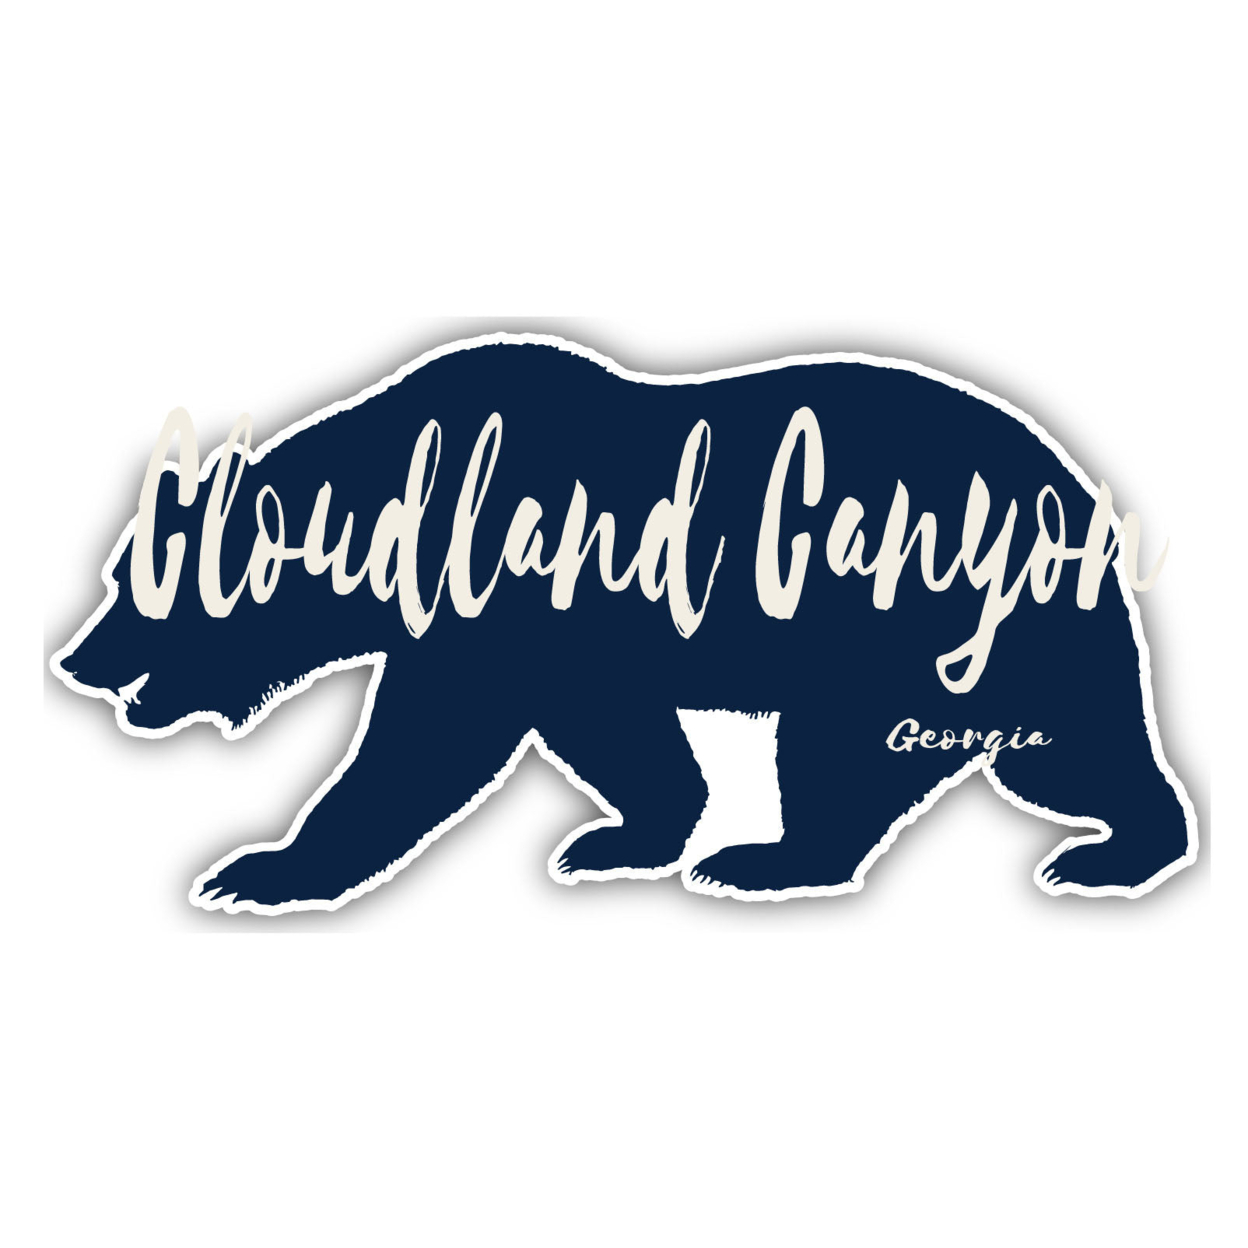 Cloudland Canyon Georgia Souvenir Decorative Stickers (Choose Theme And Size) - 4-Pack, 6-Inch, Camp Life